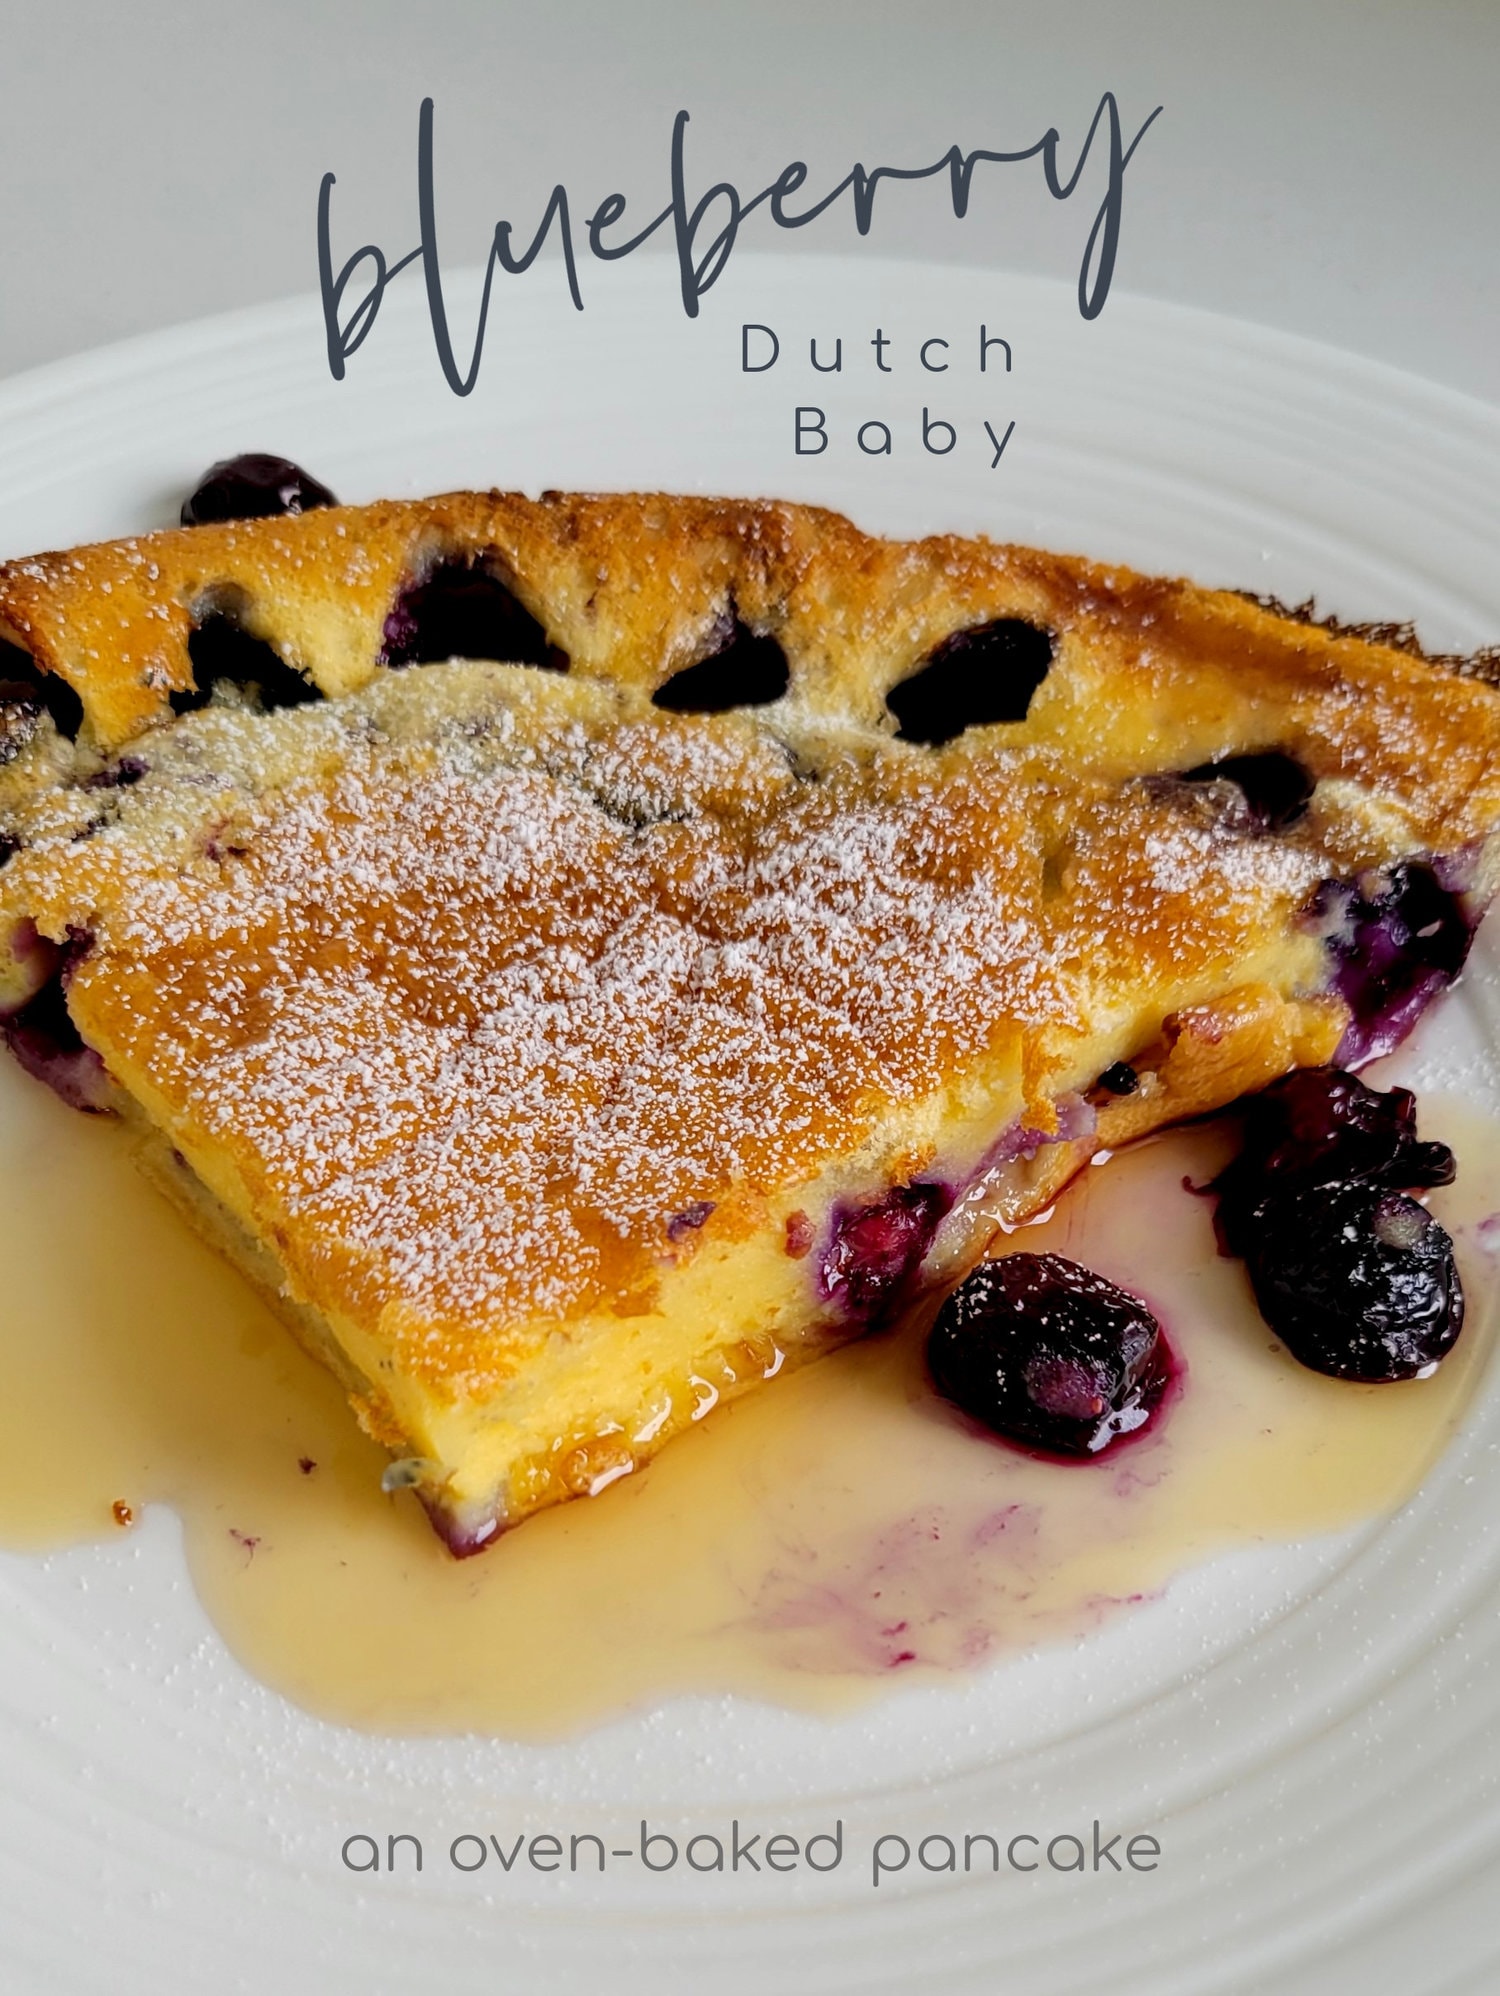 https://theculinarychase.com/wp-content/uploads/2023/07/blueberry-dutch-baby.jpg